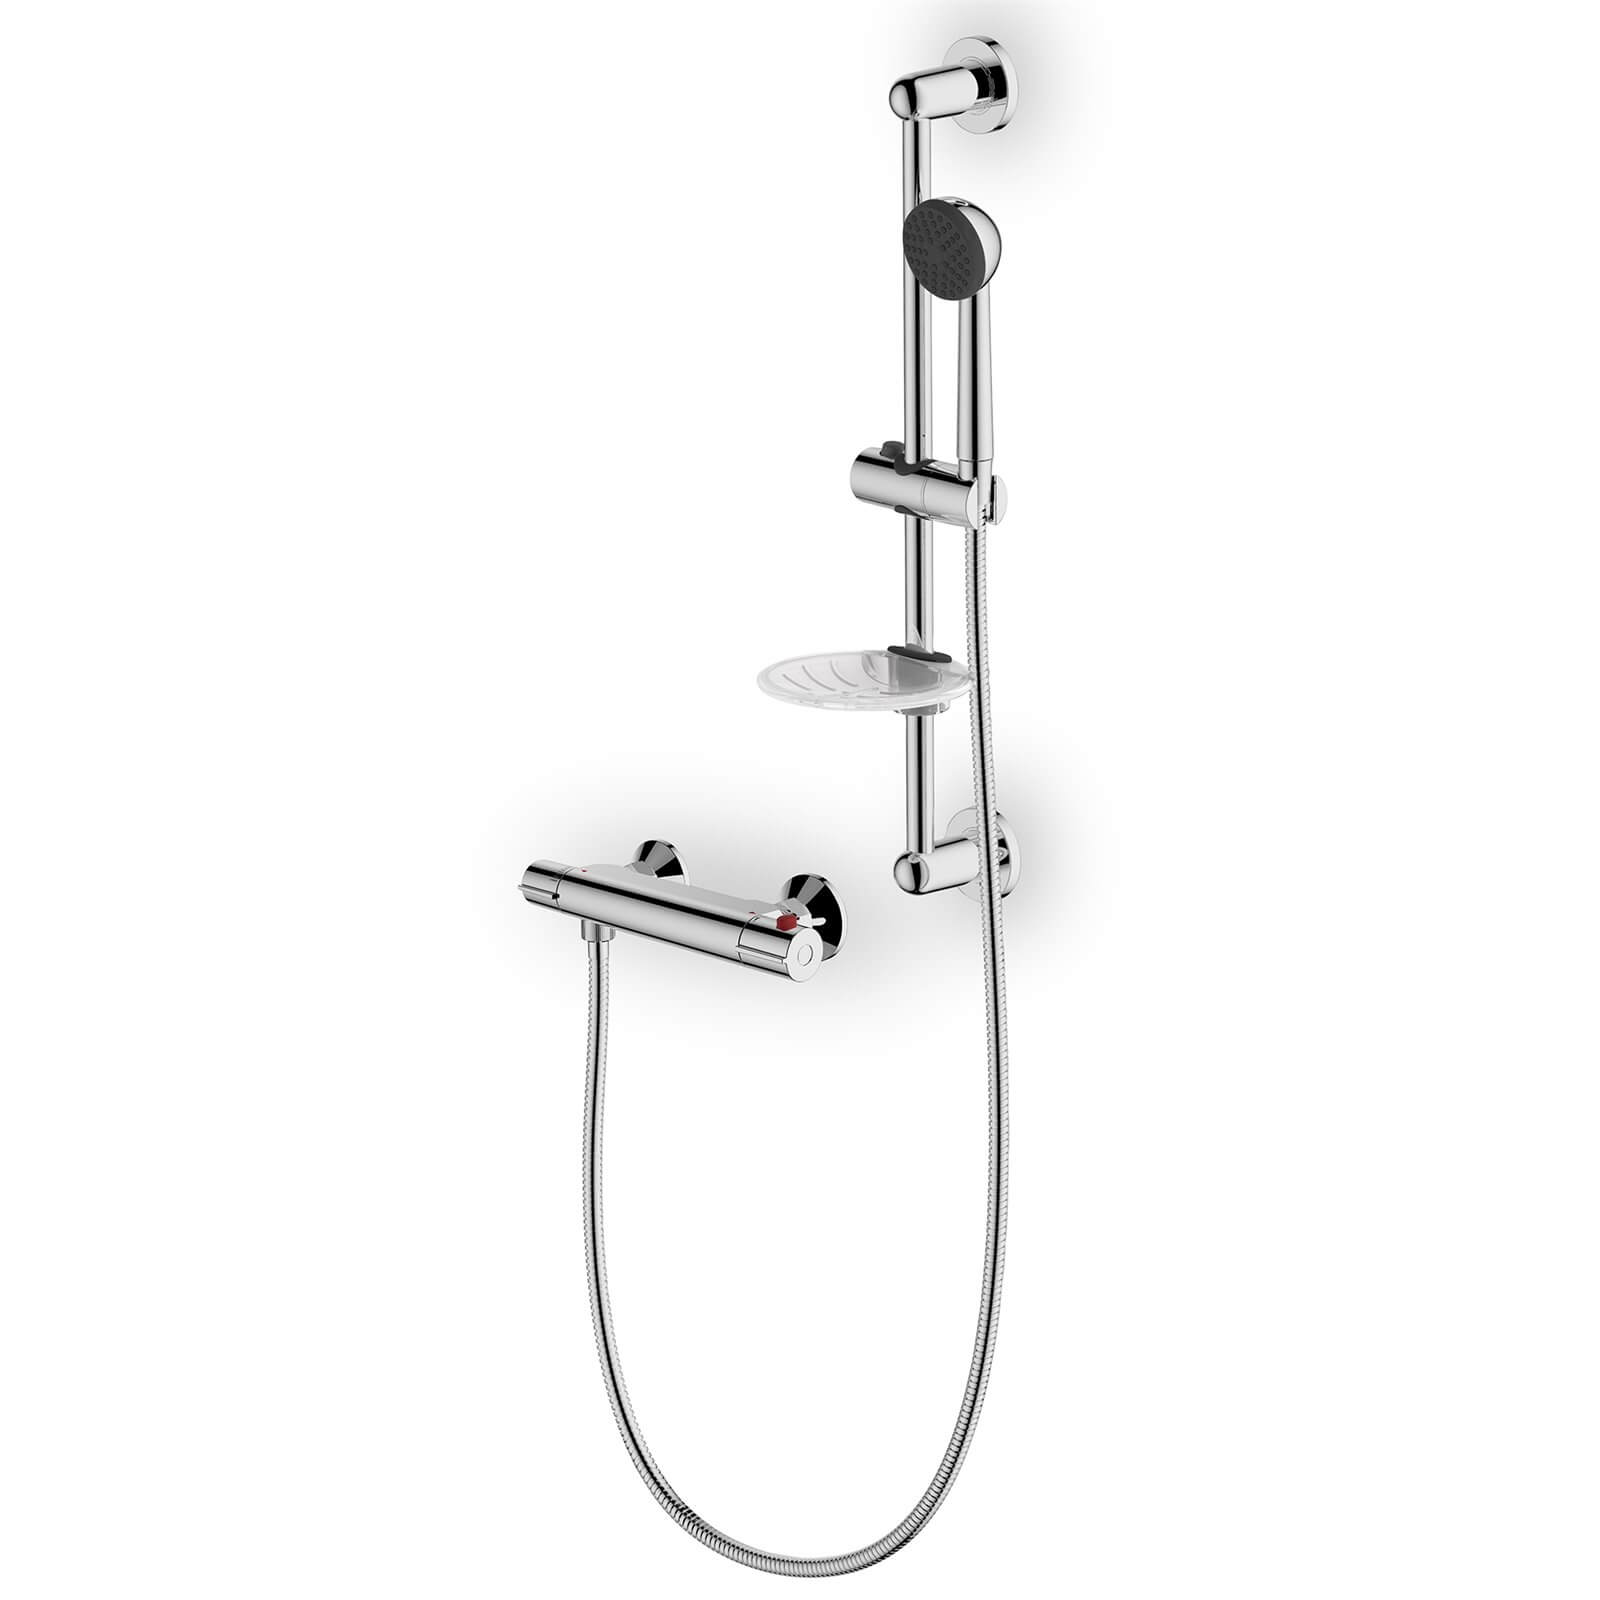 Photo of Talisker Thermostatic Mixer Shower - Chrome